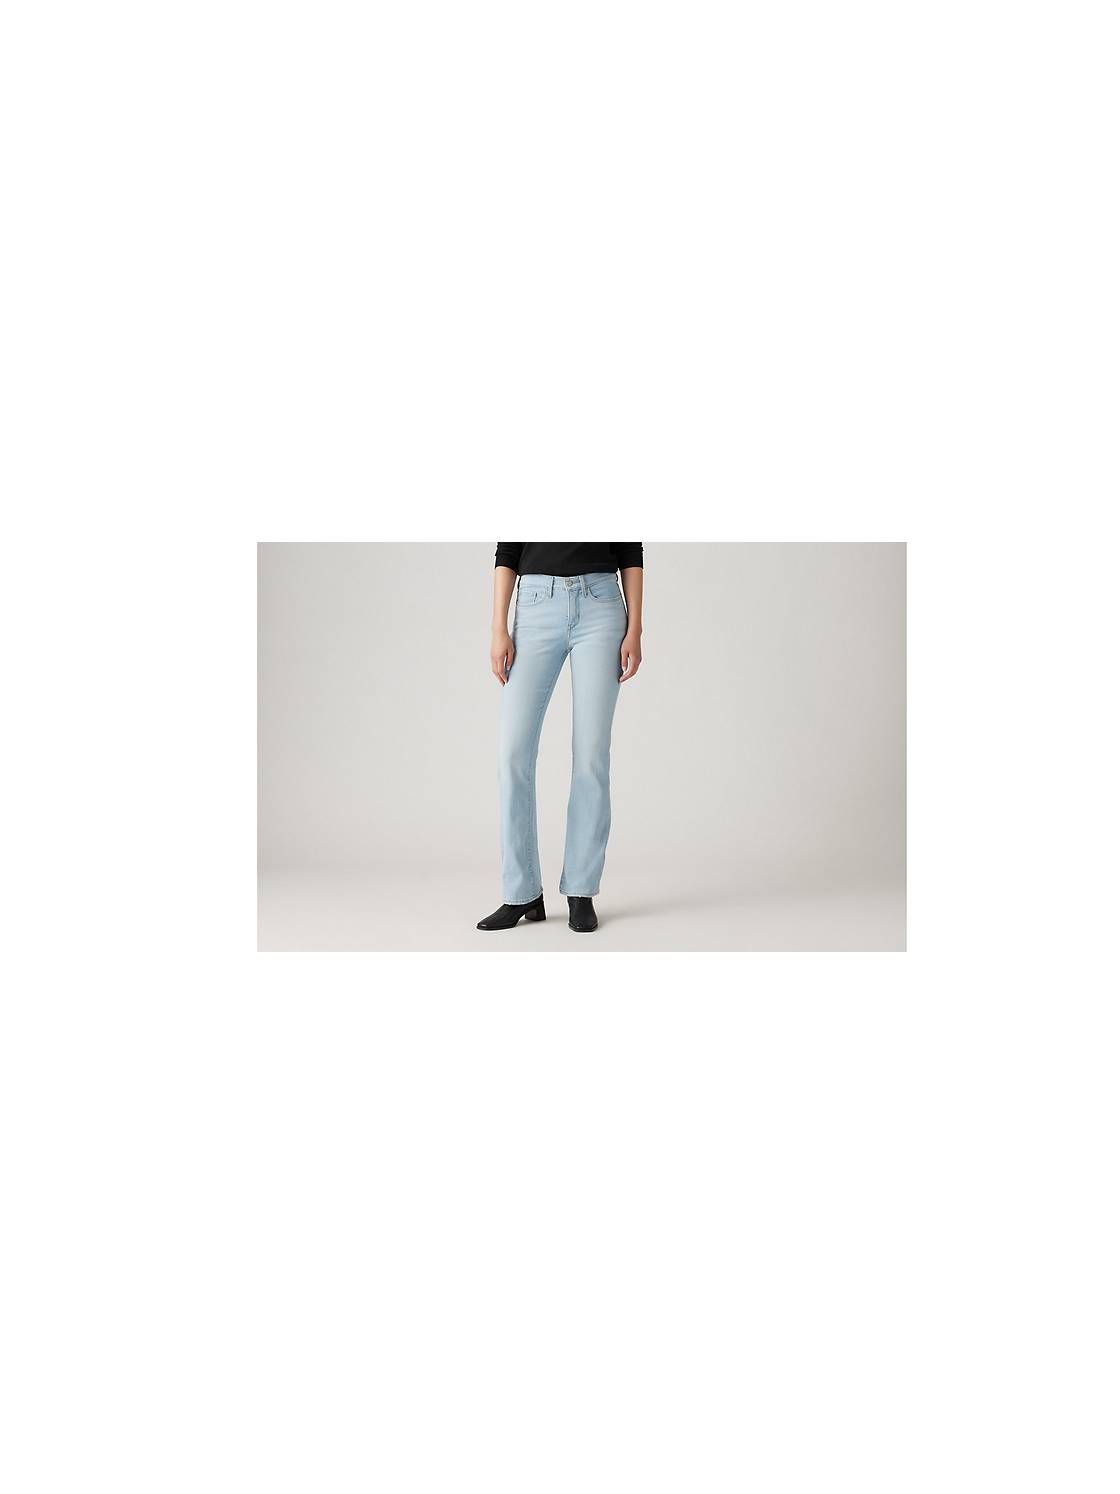 Light Wash Blue Jeans with Front Seam - Elements Unleashed